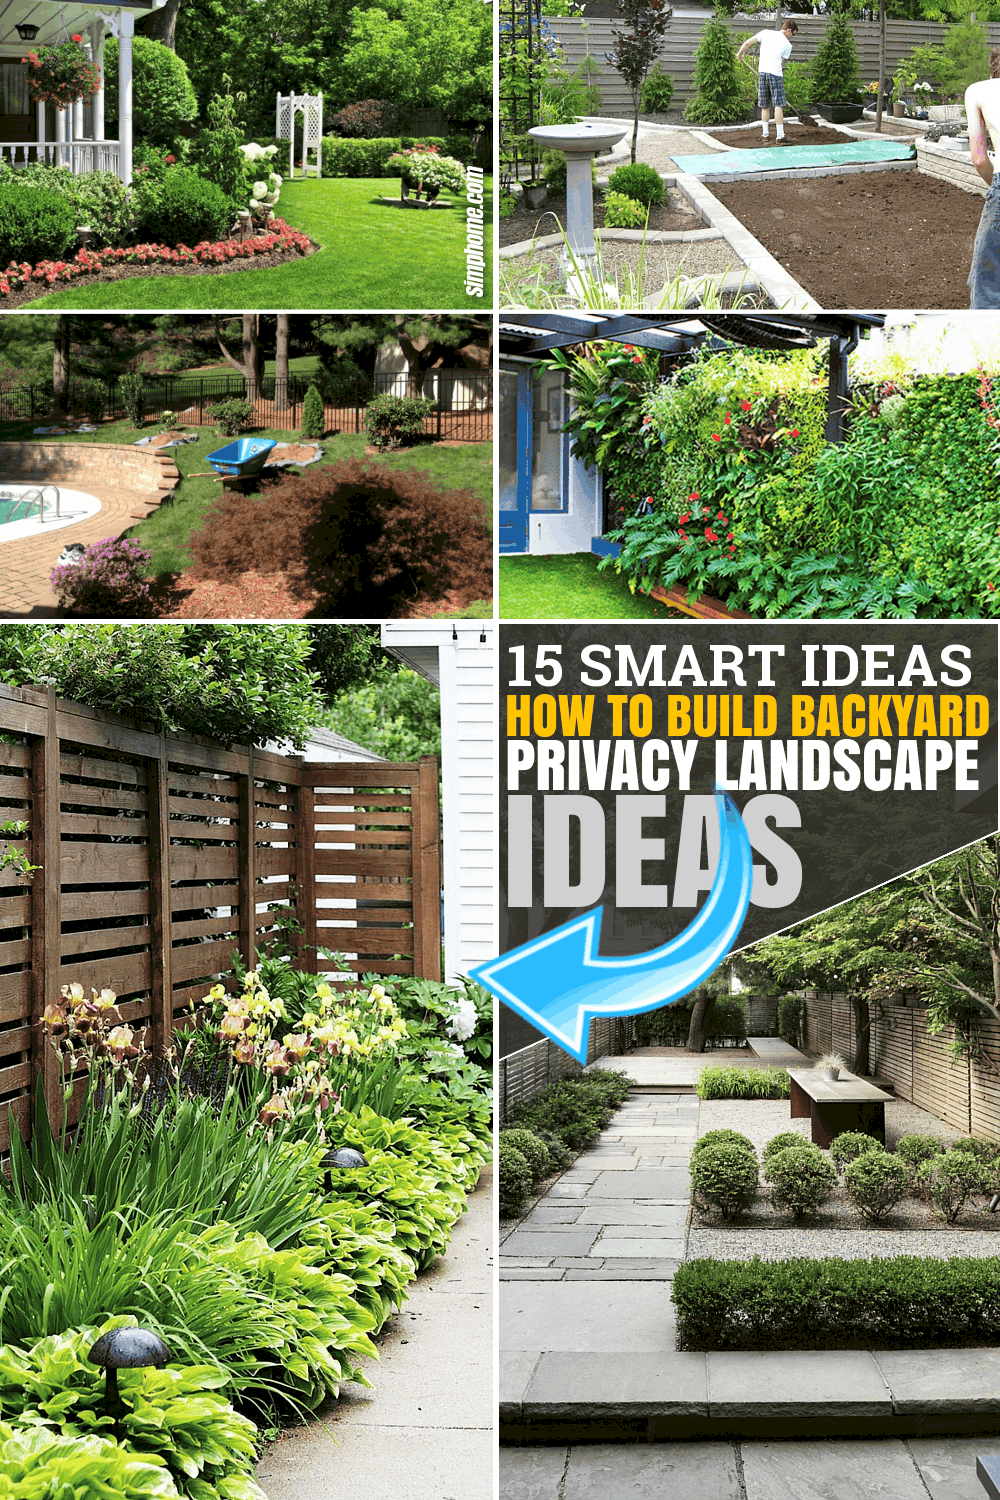 SIMPHOME.COM 15Ideas How to Make Backyard Privacy Landscaping Featured Image